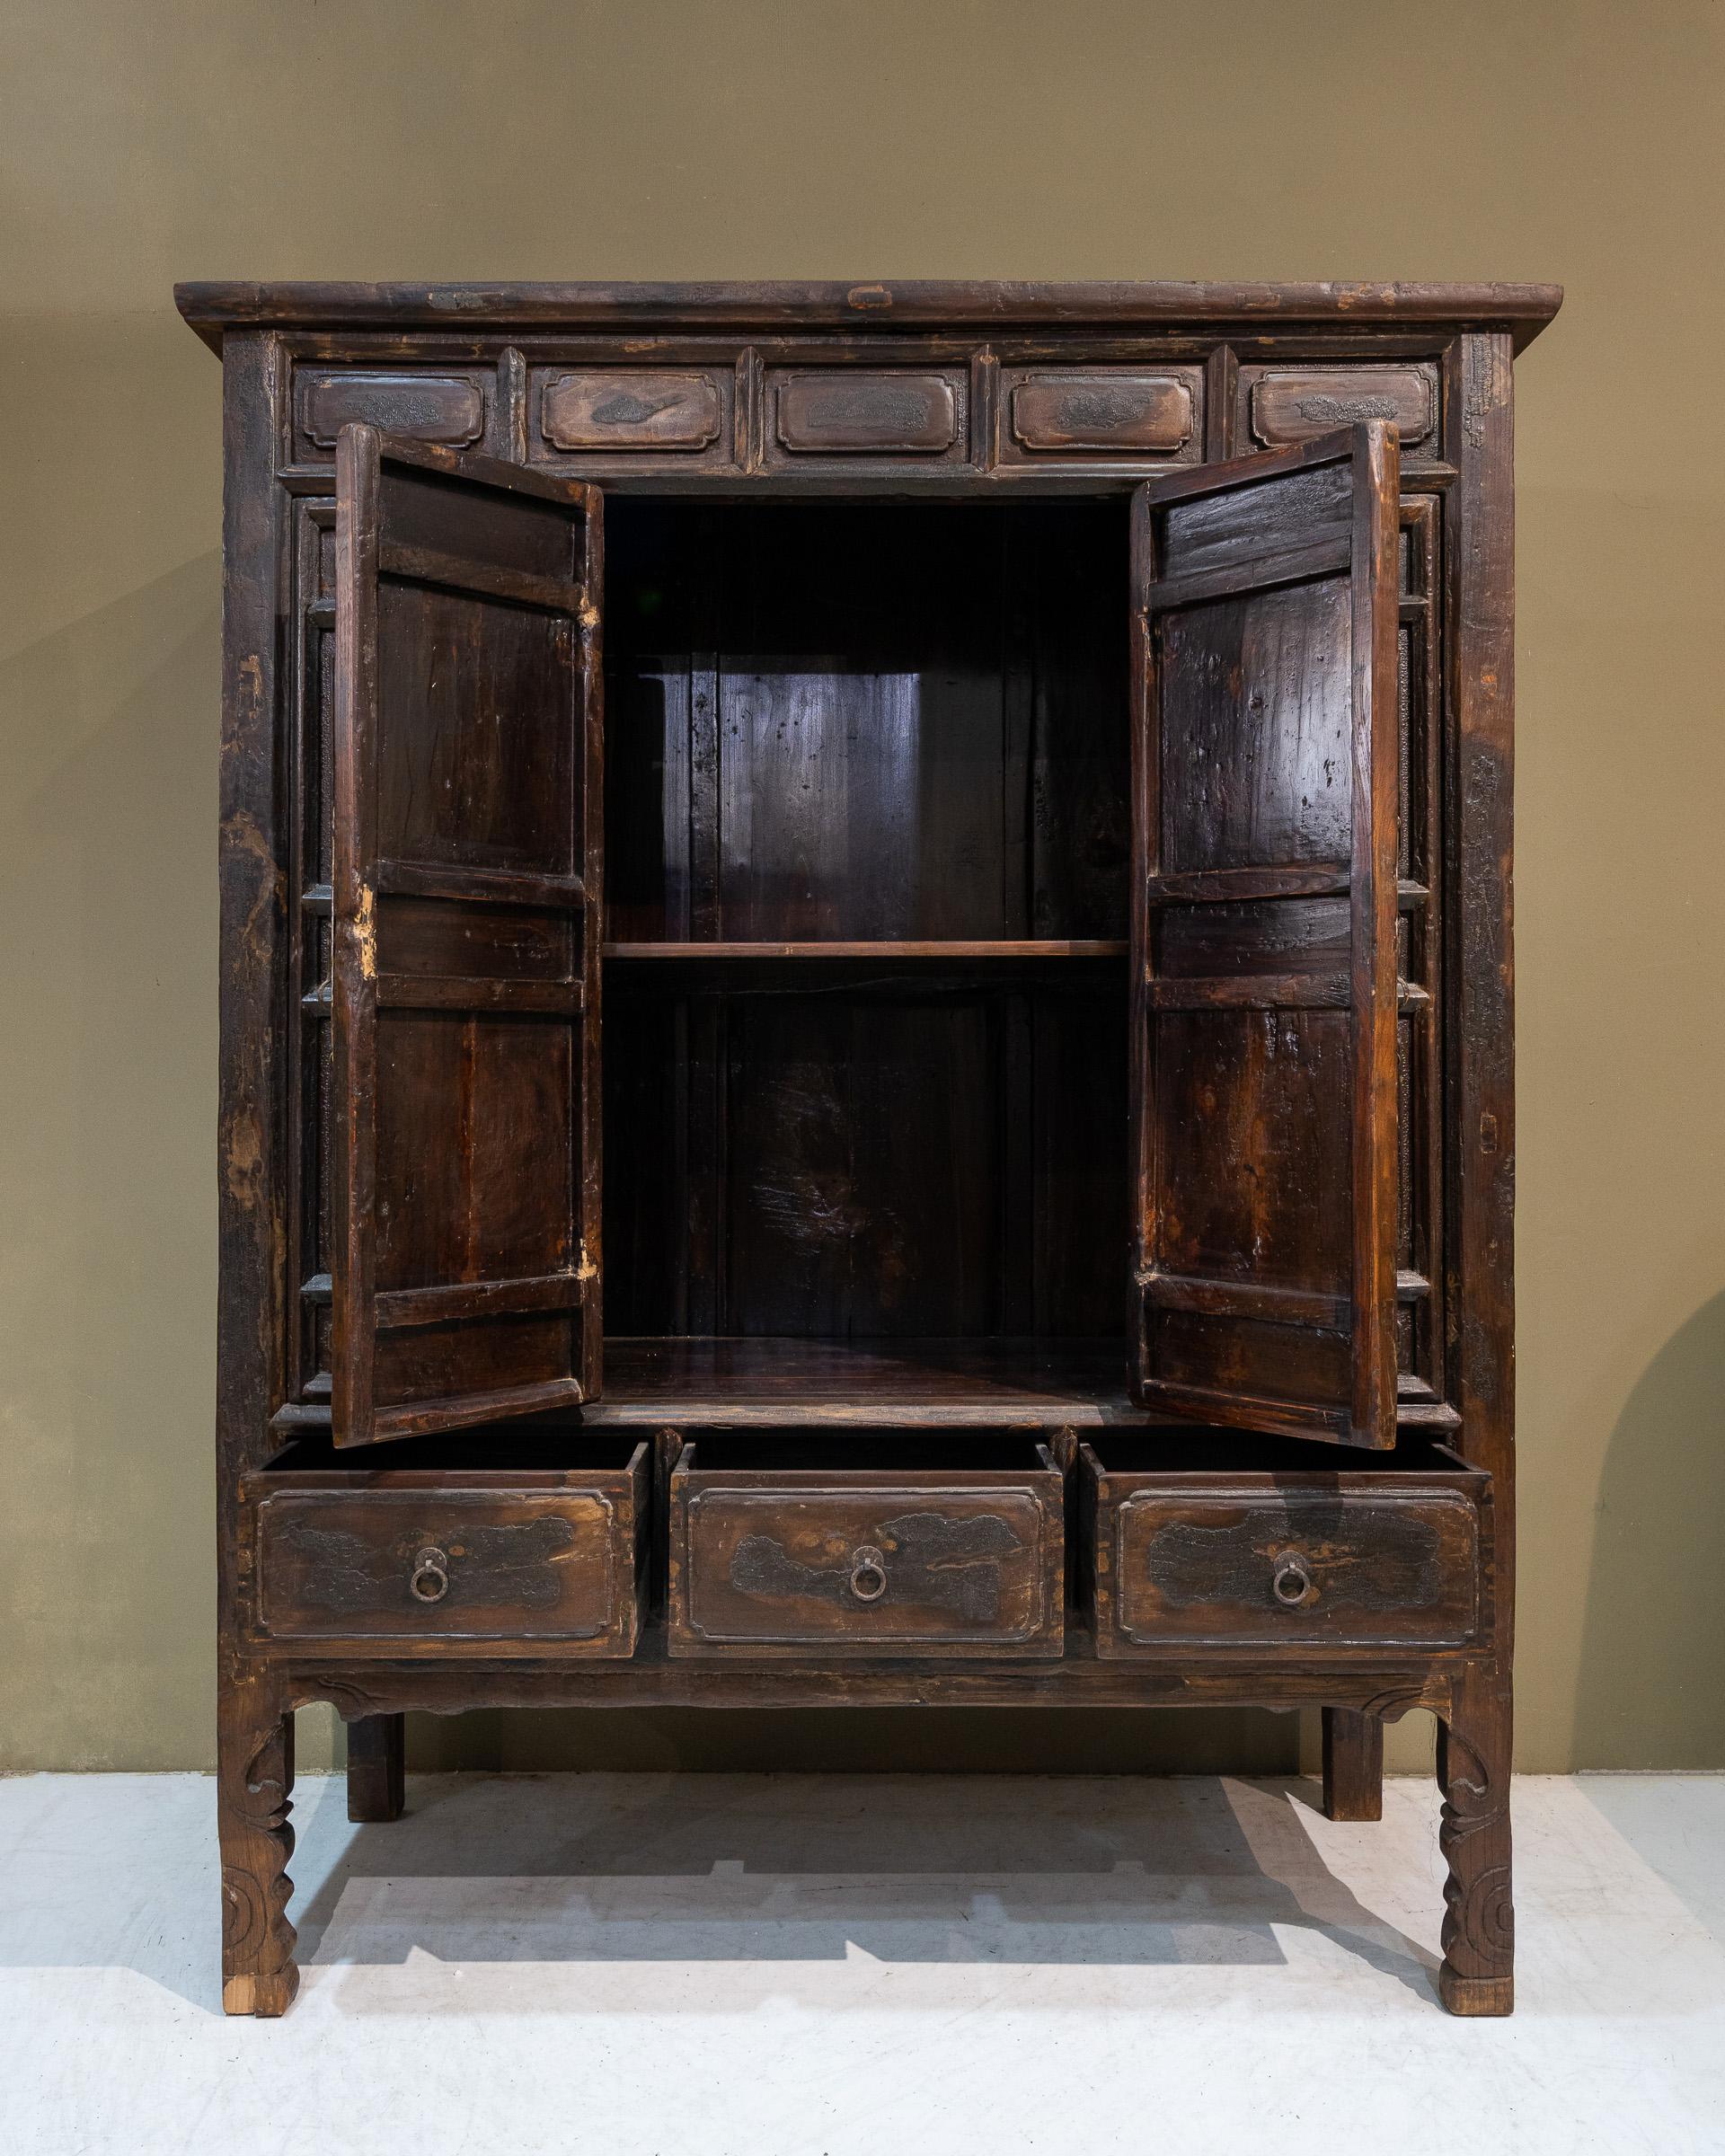 Originally a black lacquer cabinet, but much of the lacquer have peeled off, revealing the lovely wood underneath. Only the middle doors open, the panels on the left and right are secured with wooden pegs inside and they can be removed as well.